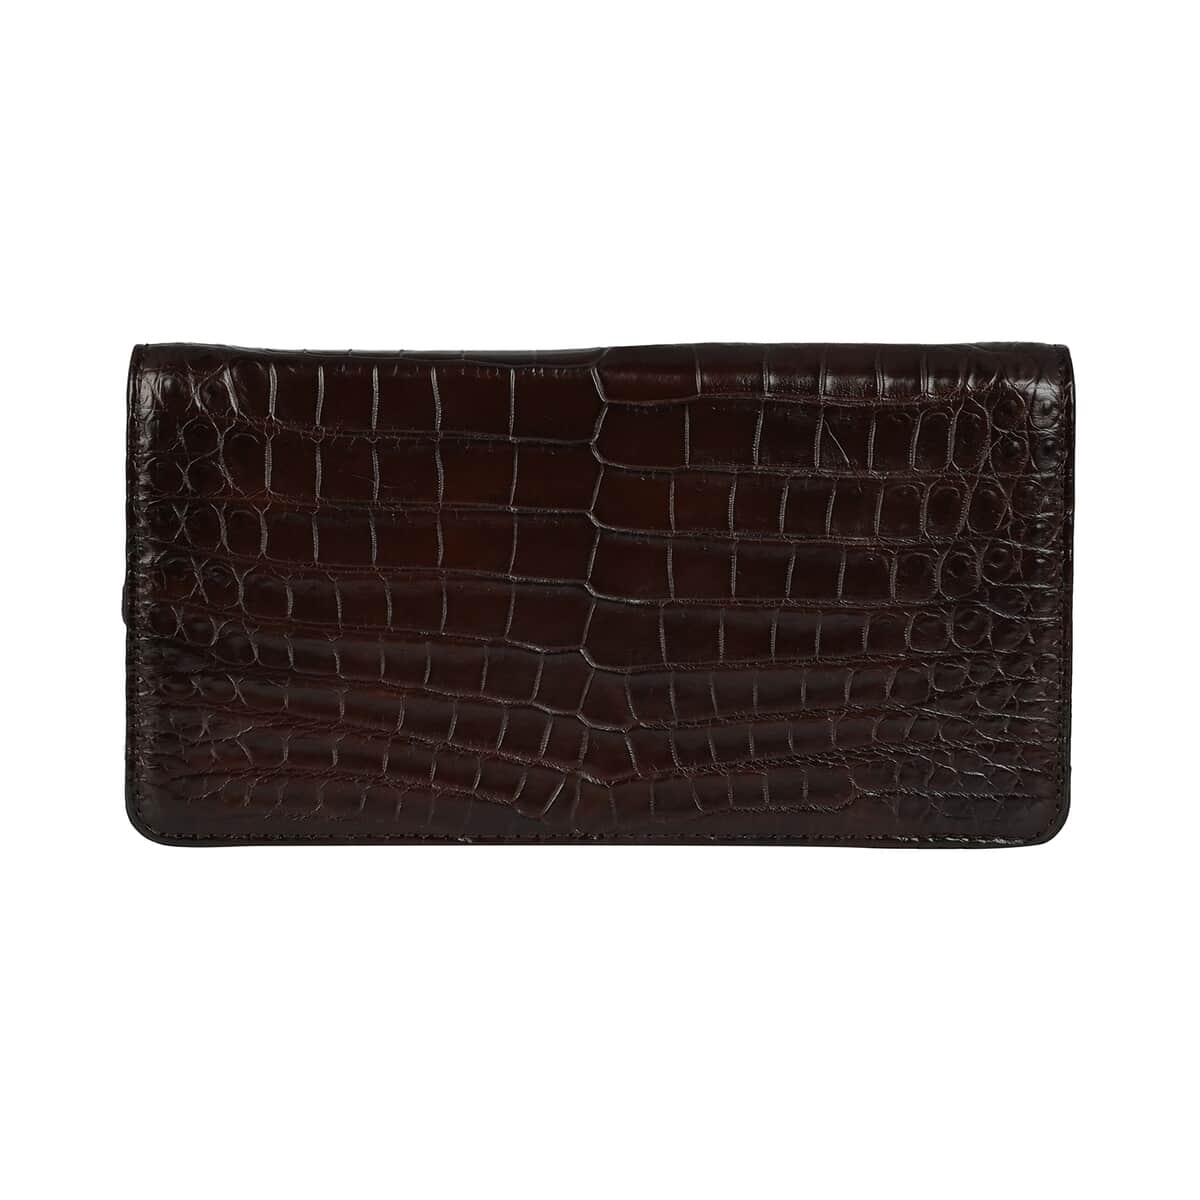 GRAND PELLE Dark Chocolate Genuine Caiman Crocodile Leather Shell Along with Cow Leather Lining Wallet (8.3"x4.3"x1.2") image number 0